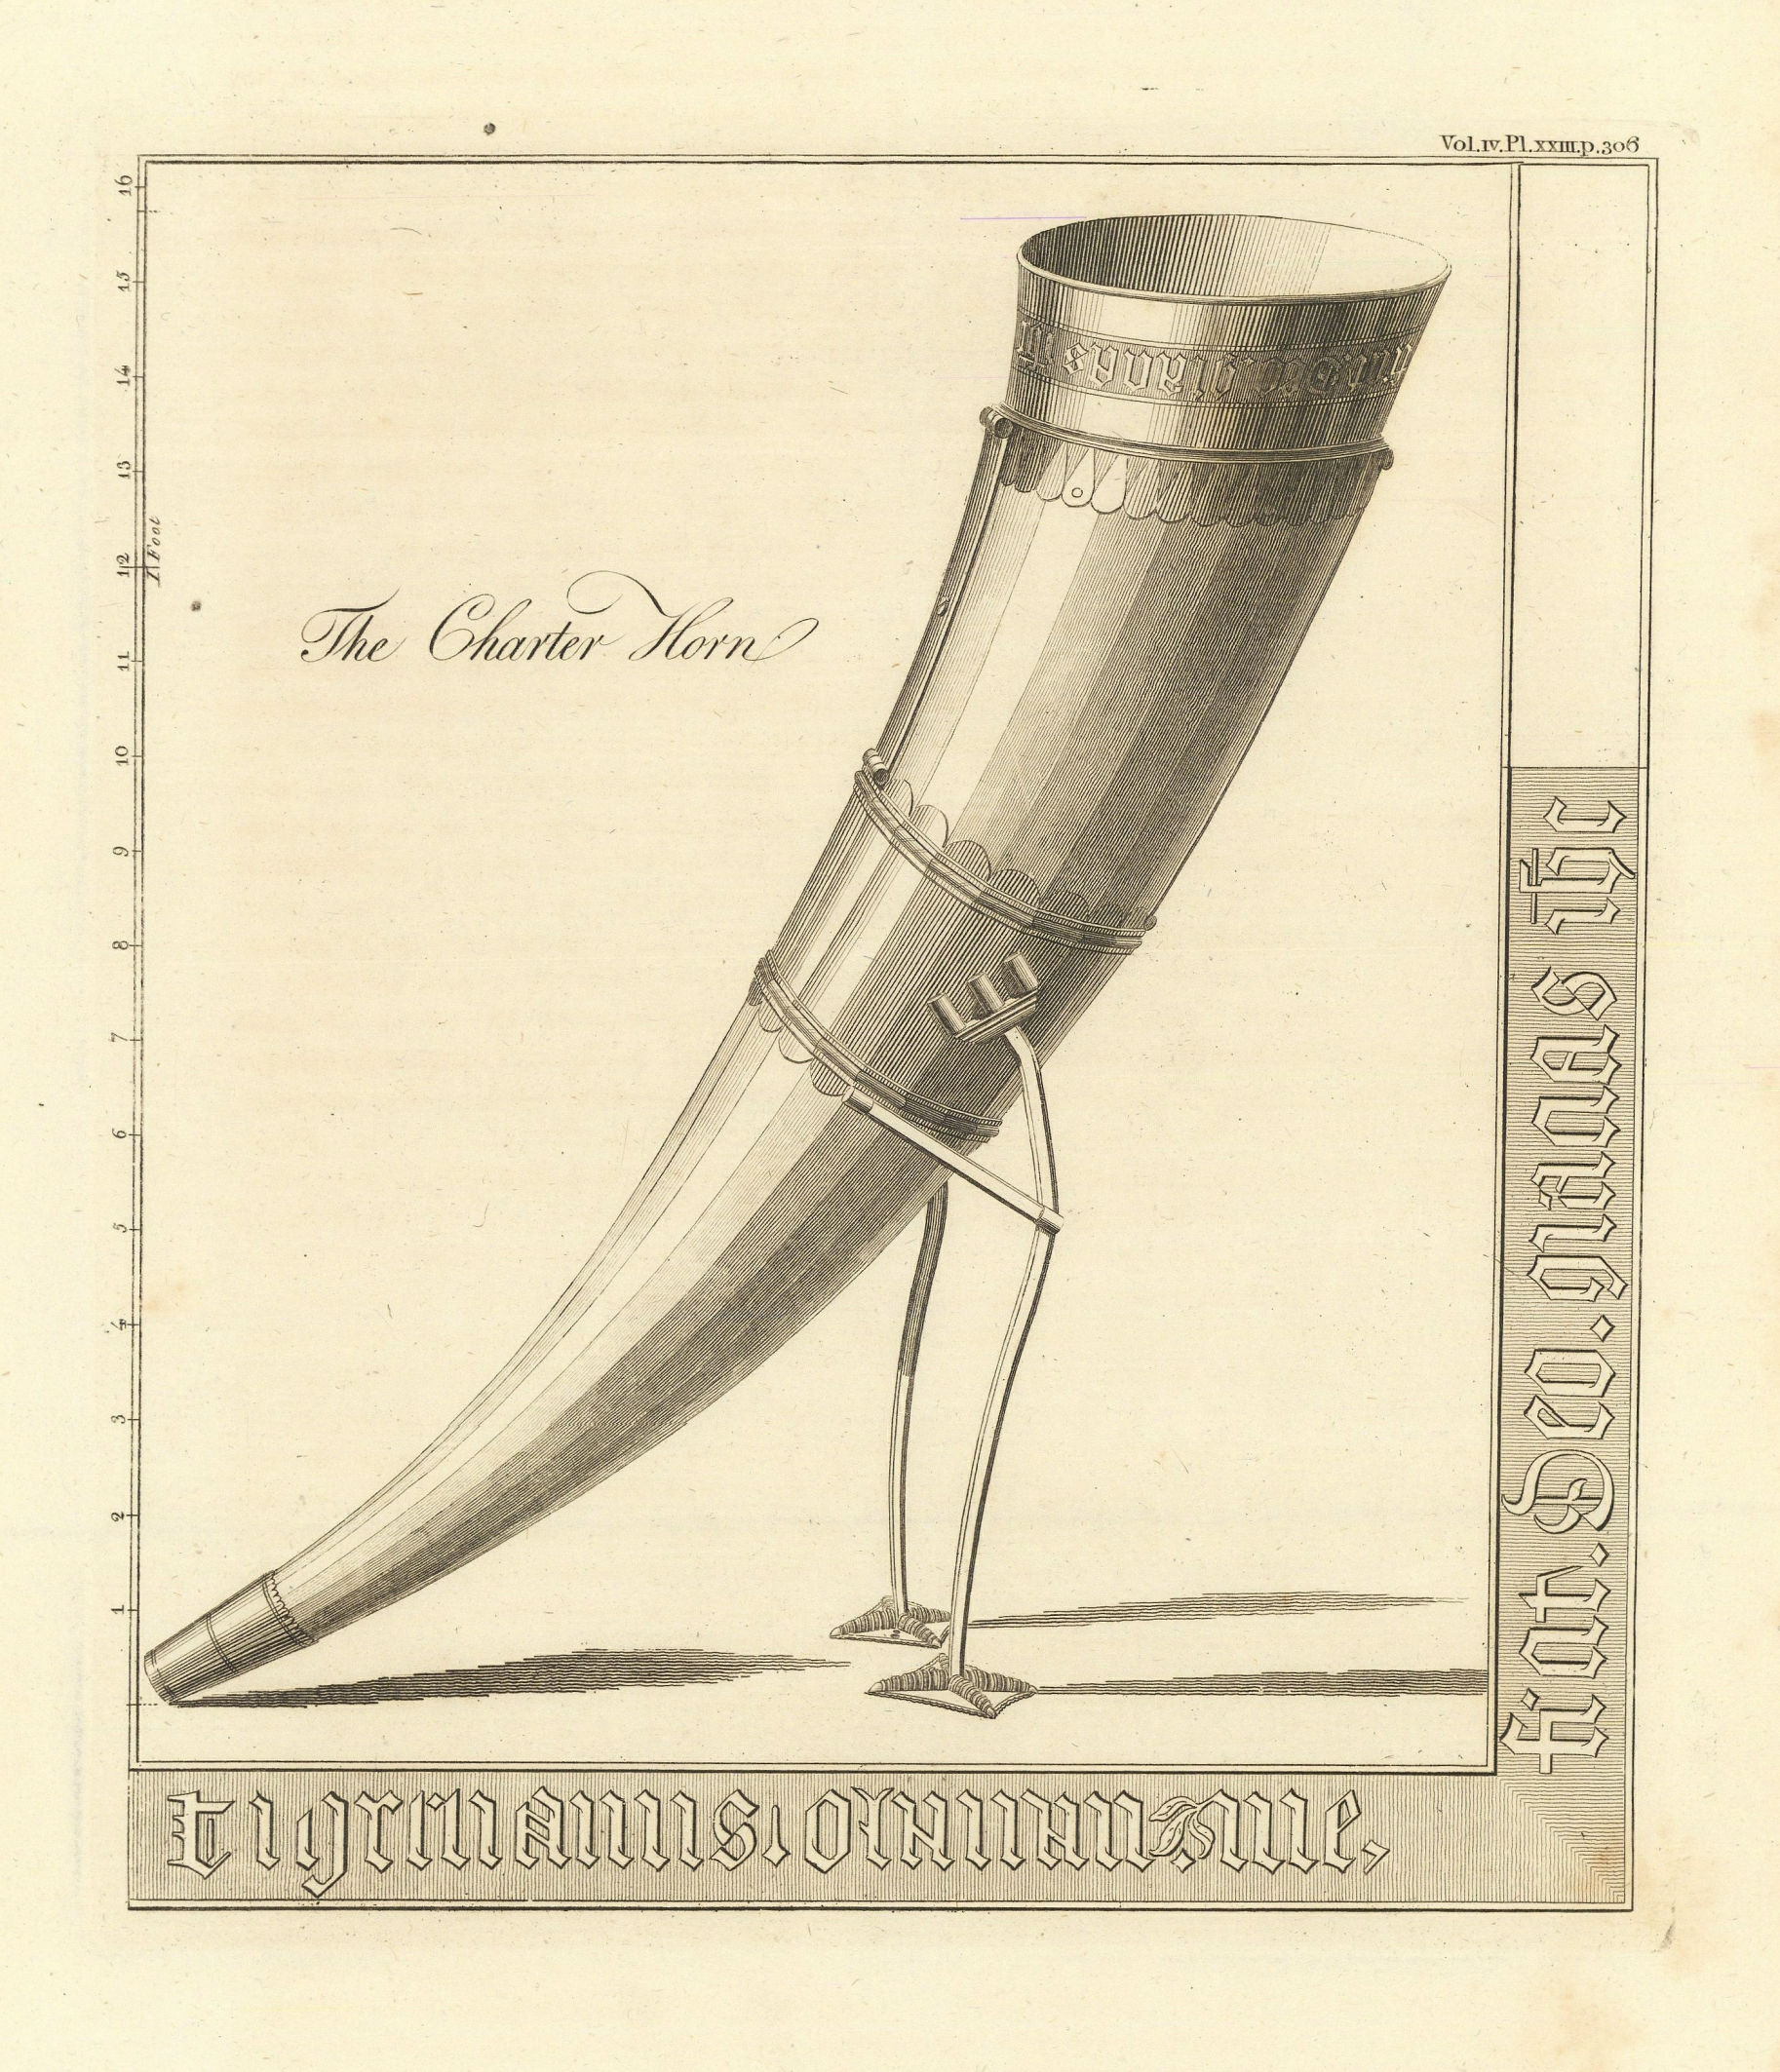 The Kavanagh Charter Horn. Ceremonial drinking horn 1806 old antique print